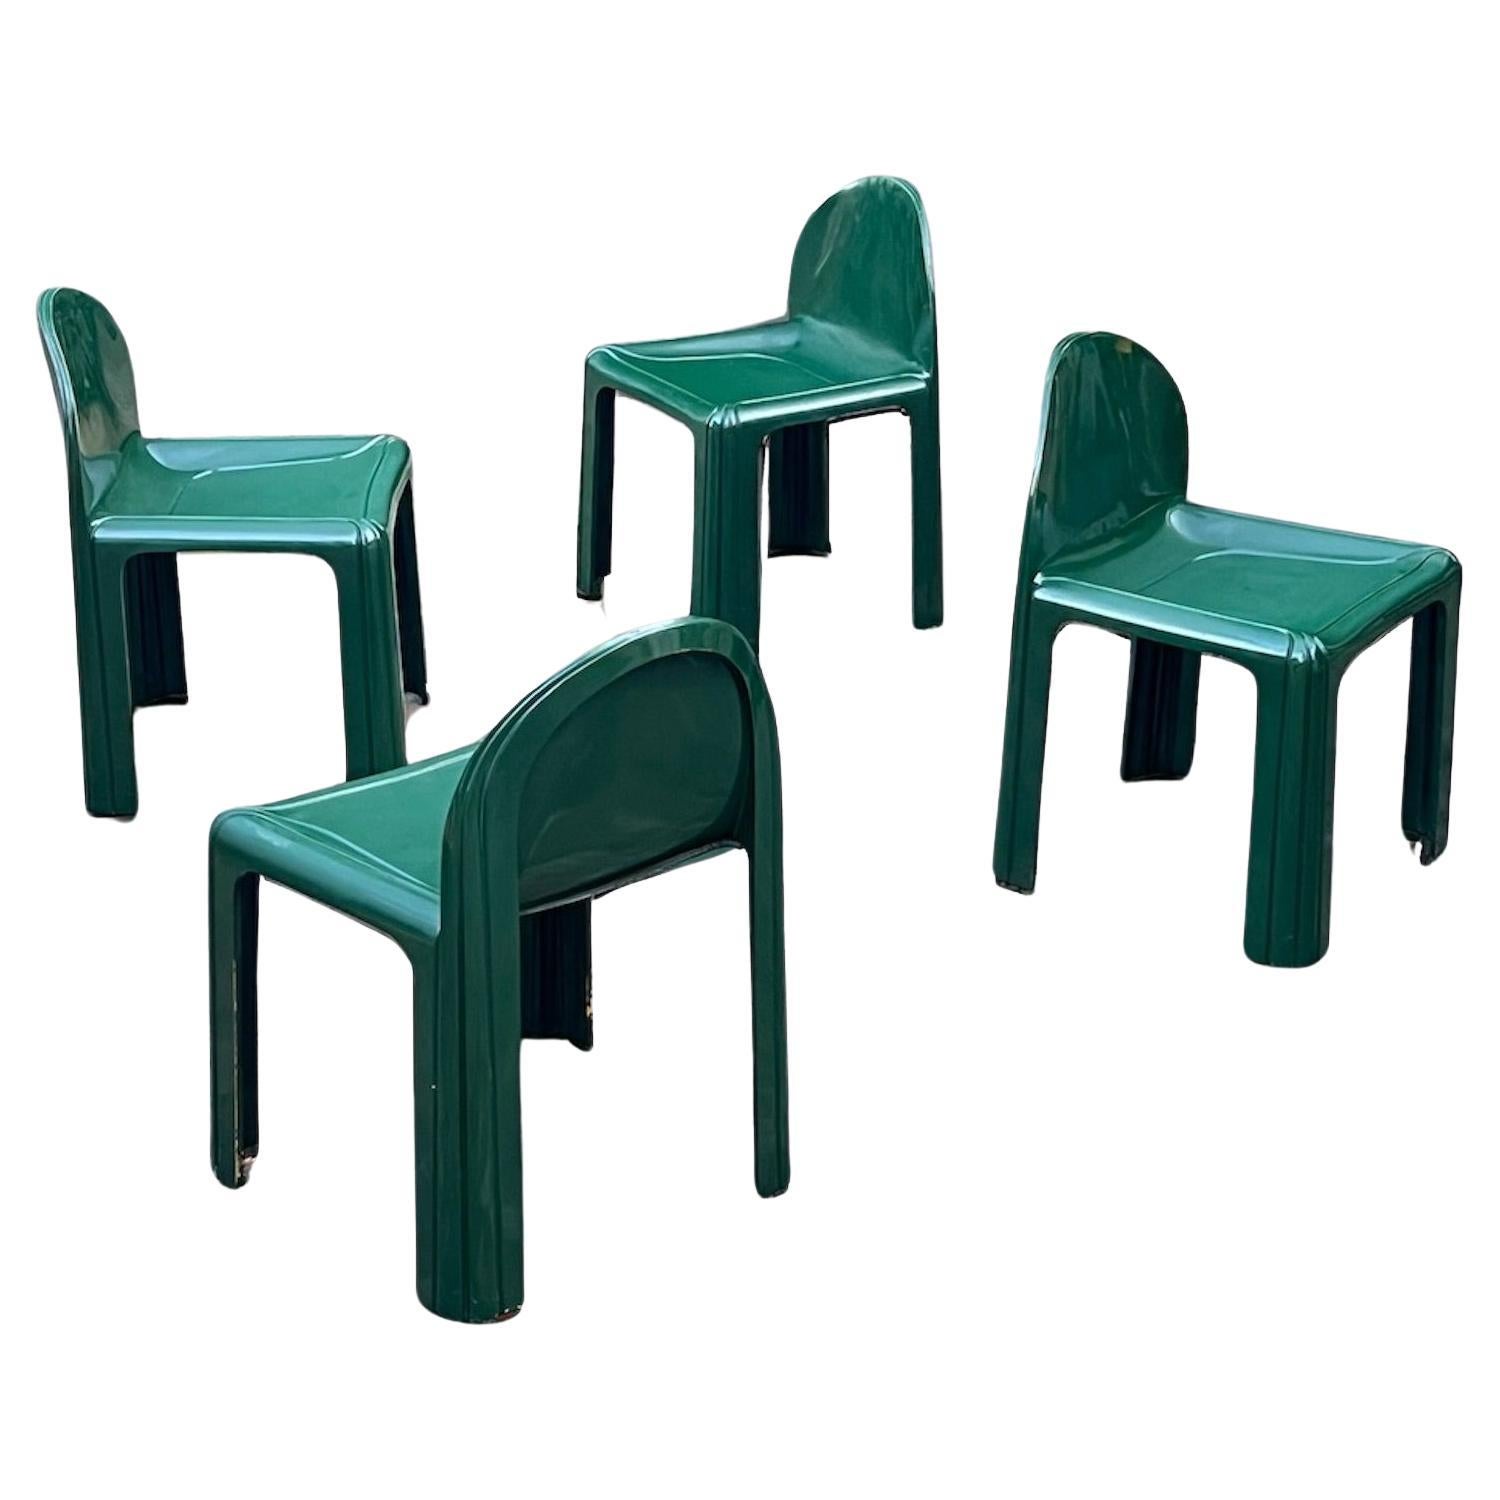 Set of 4 Green Resin Kartell Model 4854 Chairs by Gae Aulenti, 1960s For Sale